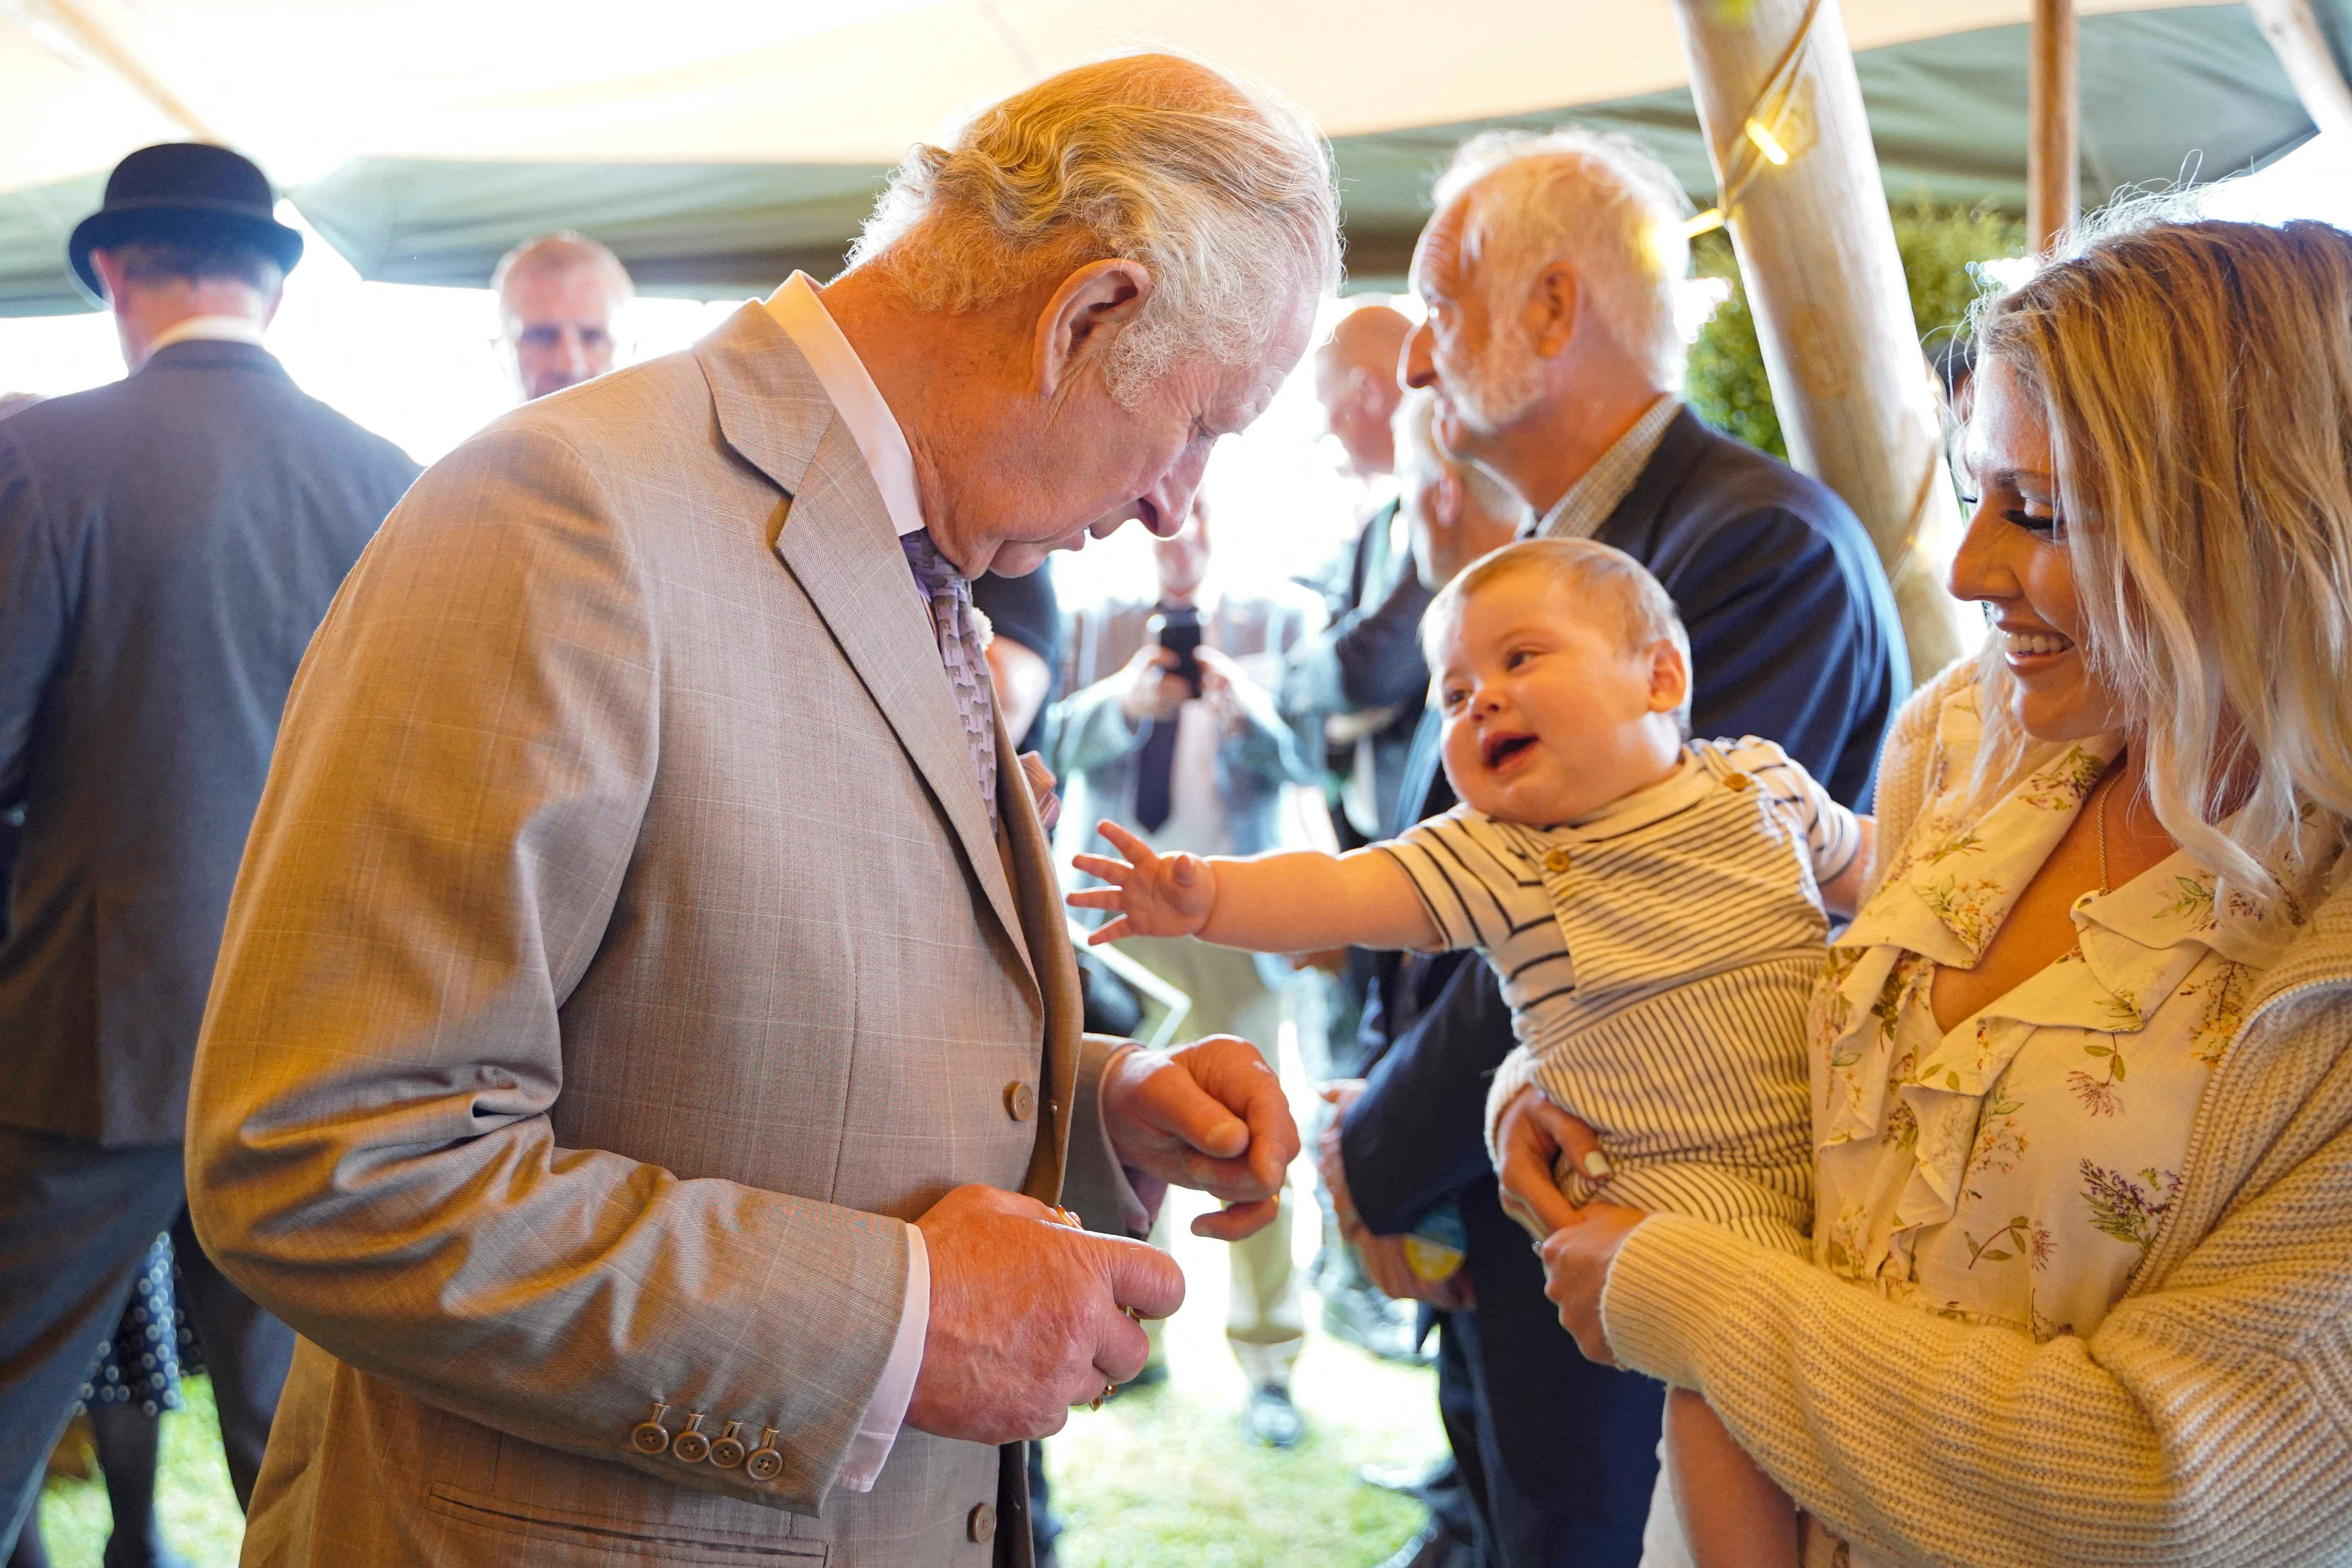 Britain's Prince Charles, Prince of Wales (L) makes a young friend during a visit to the Royal Cornwall Show at The Royal Cornwall Showground in Wadebridge, south west England. Credit: AFP Photo